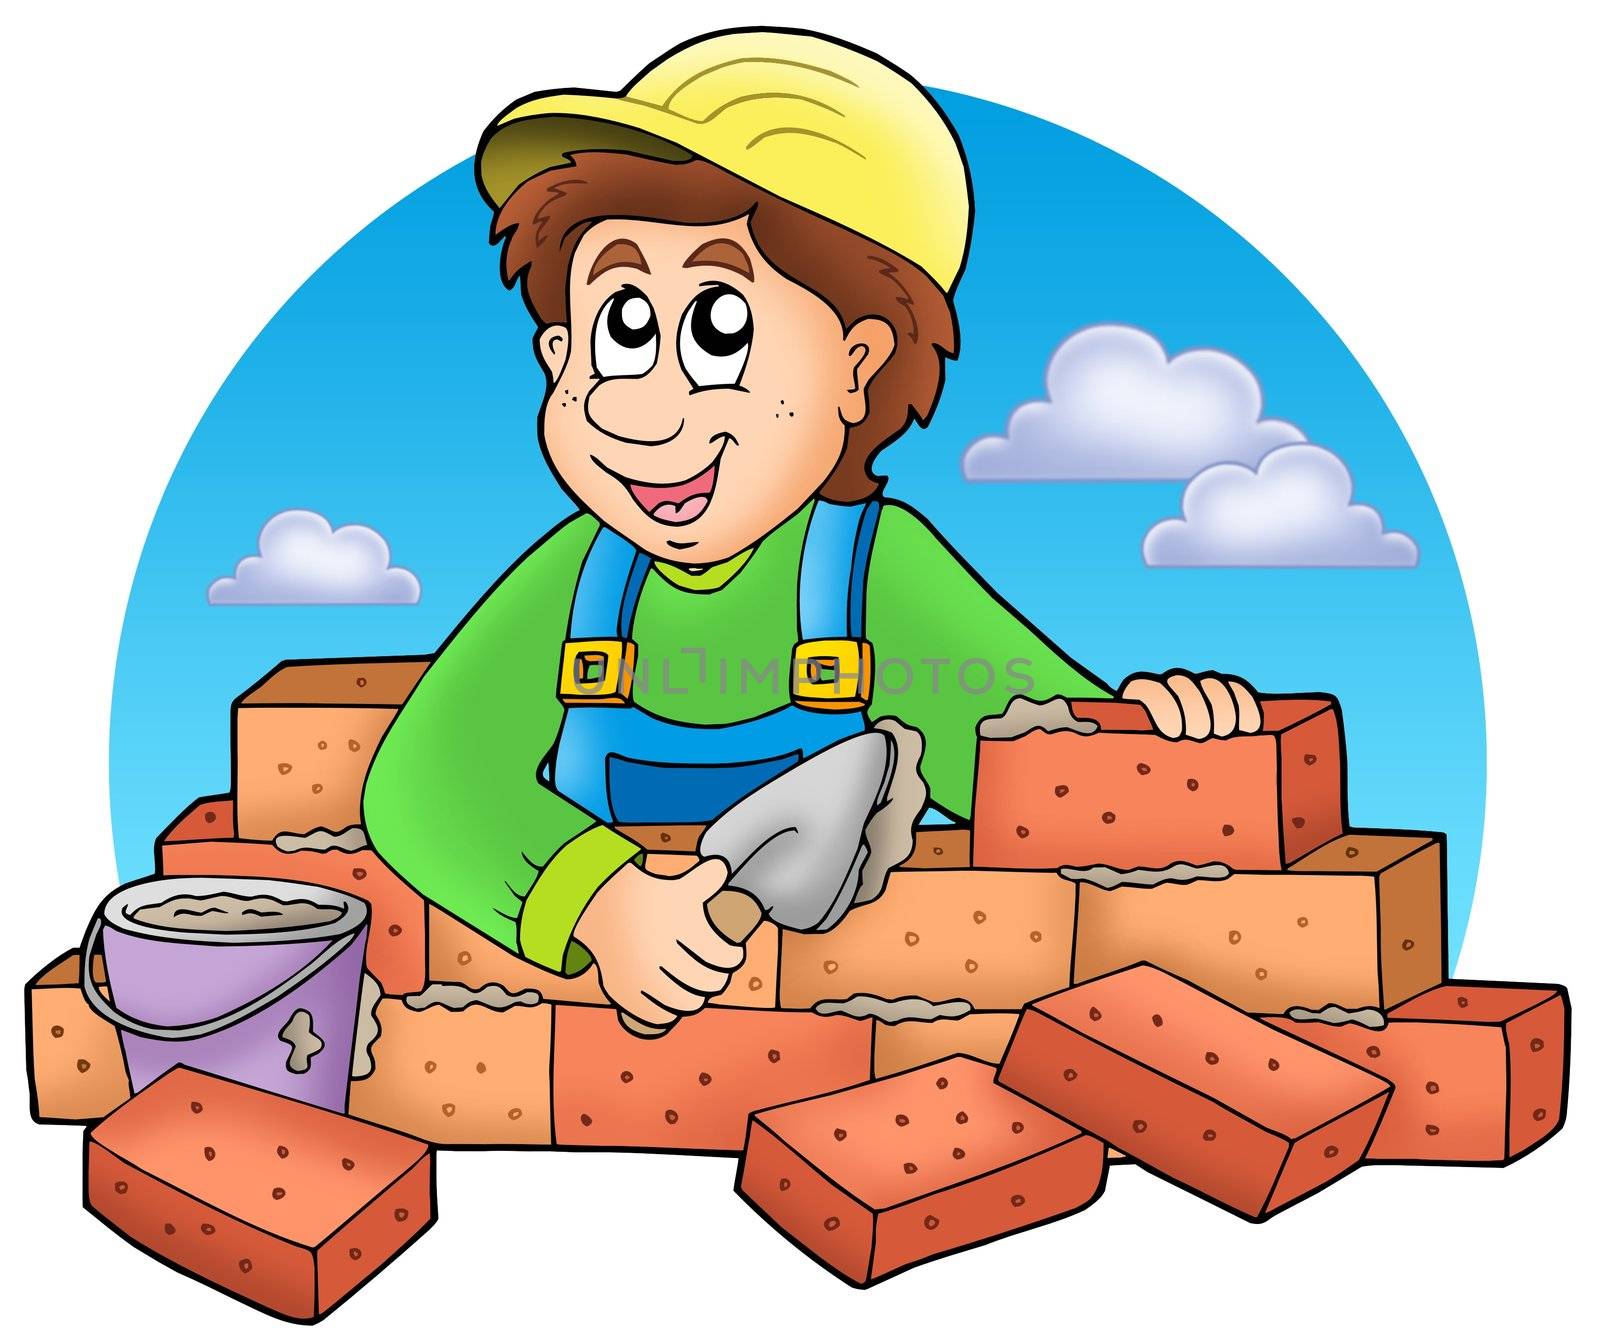 Cartoon bricklayer with clouds by clairev